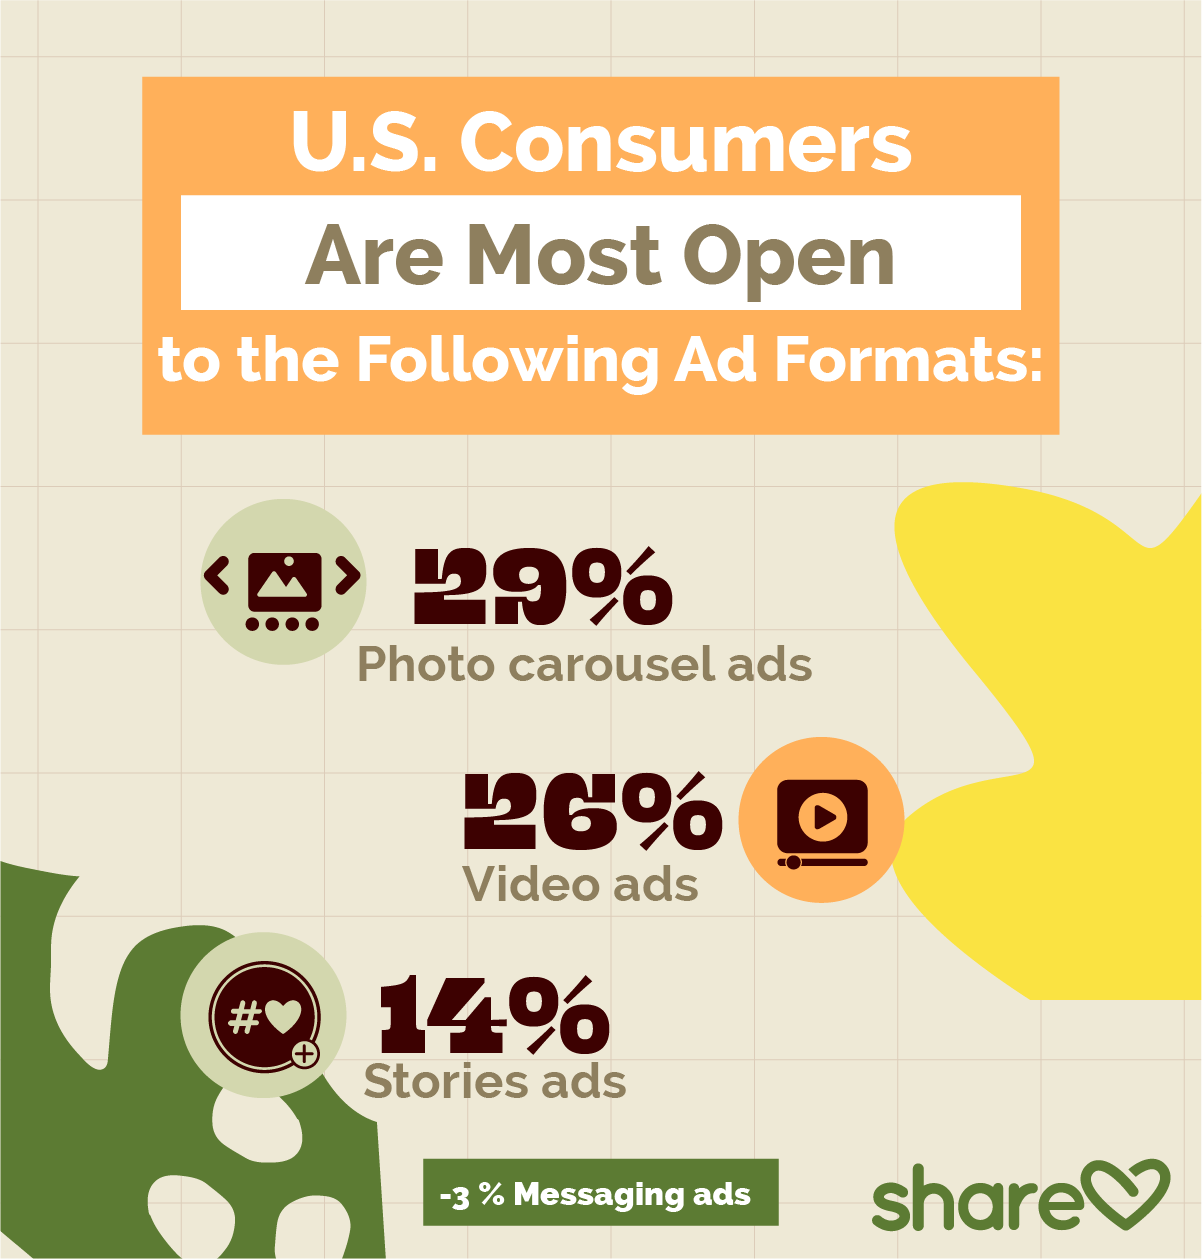 U.S. Consumers Are Most Open to the Following Ad Formats